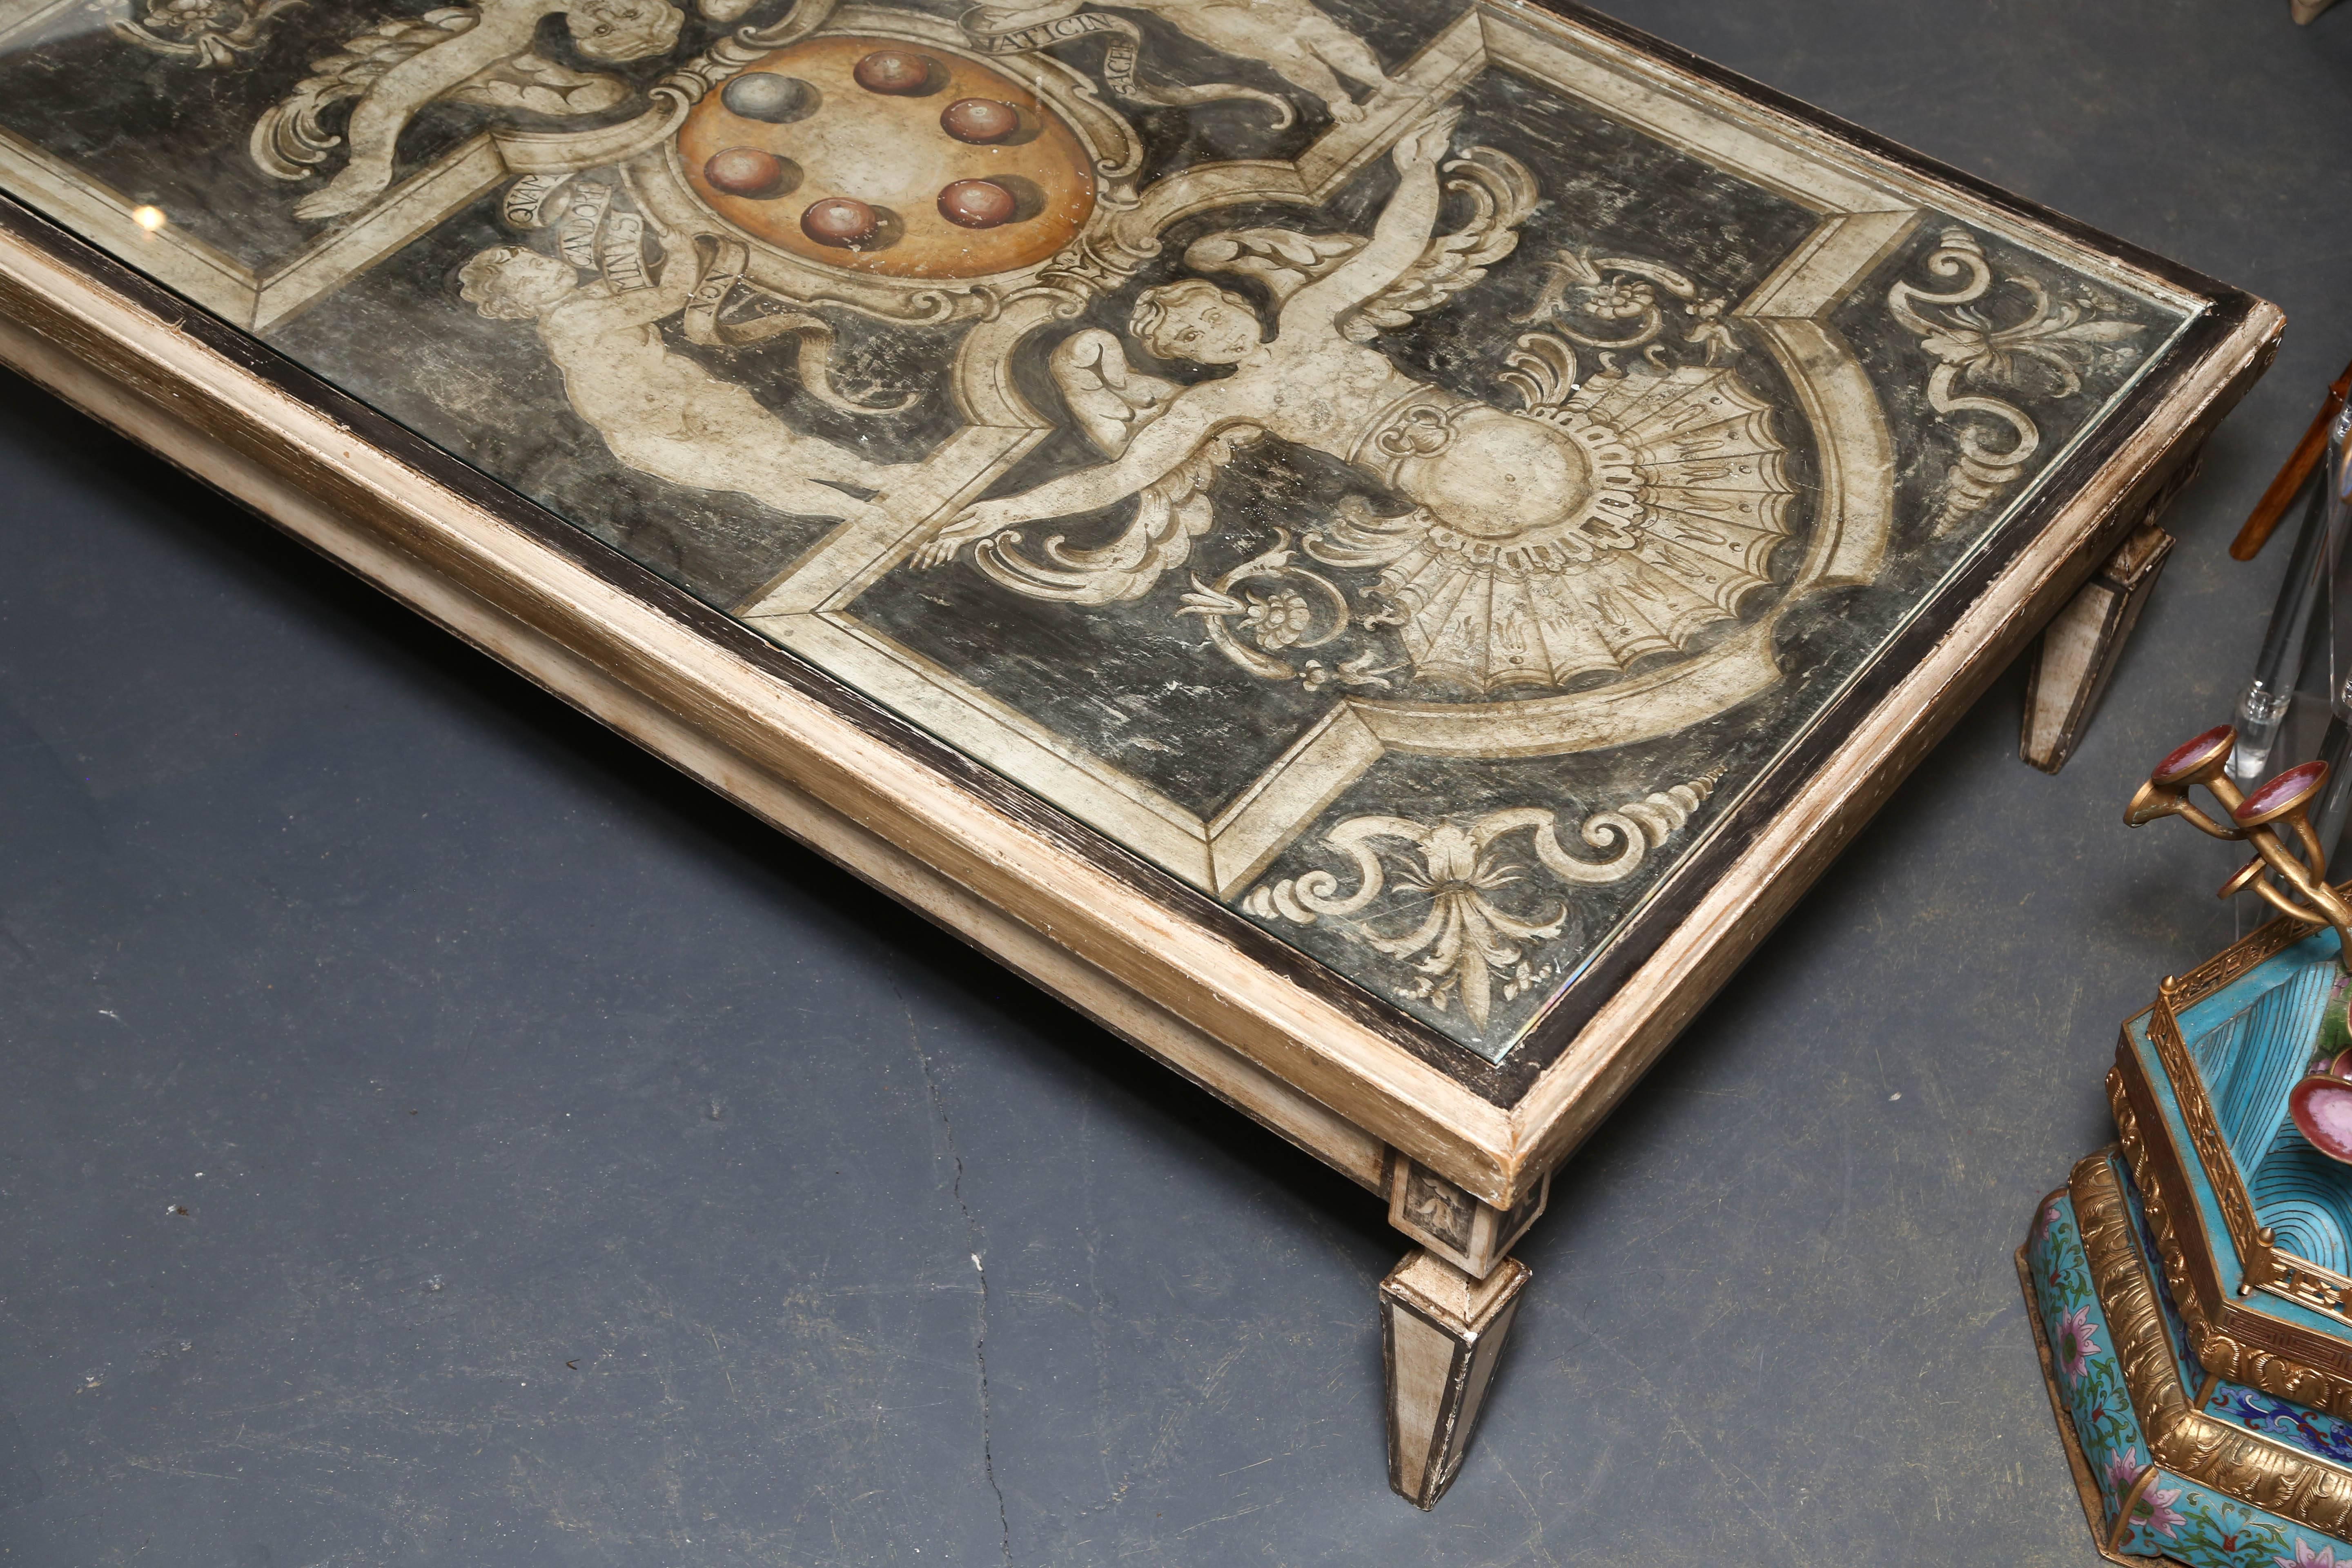 Glass Superb Oversized 18th Century Italian Panel Mounted as a Coffee Table